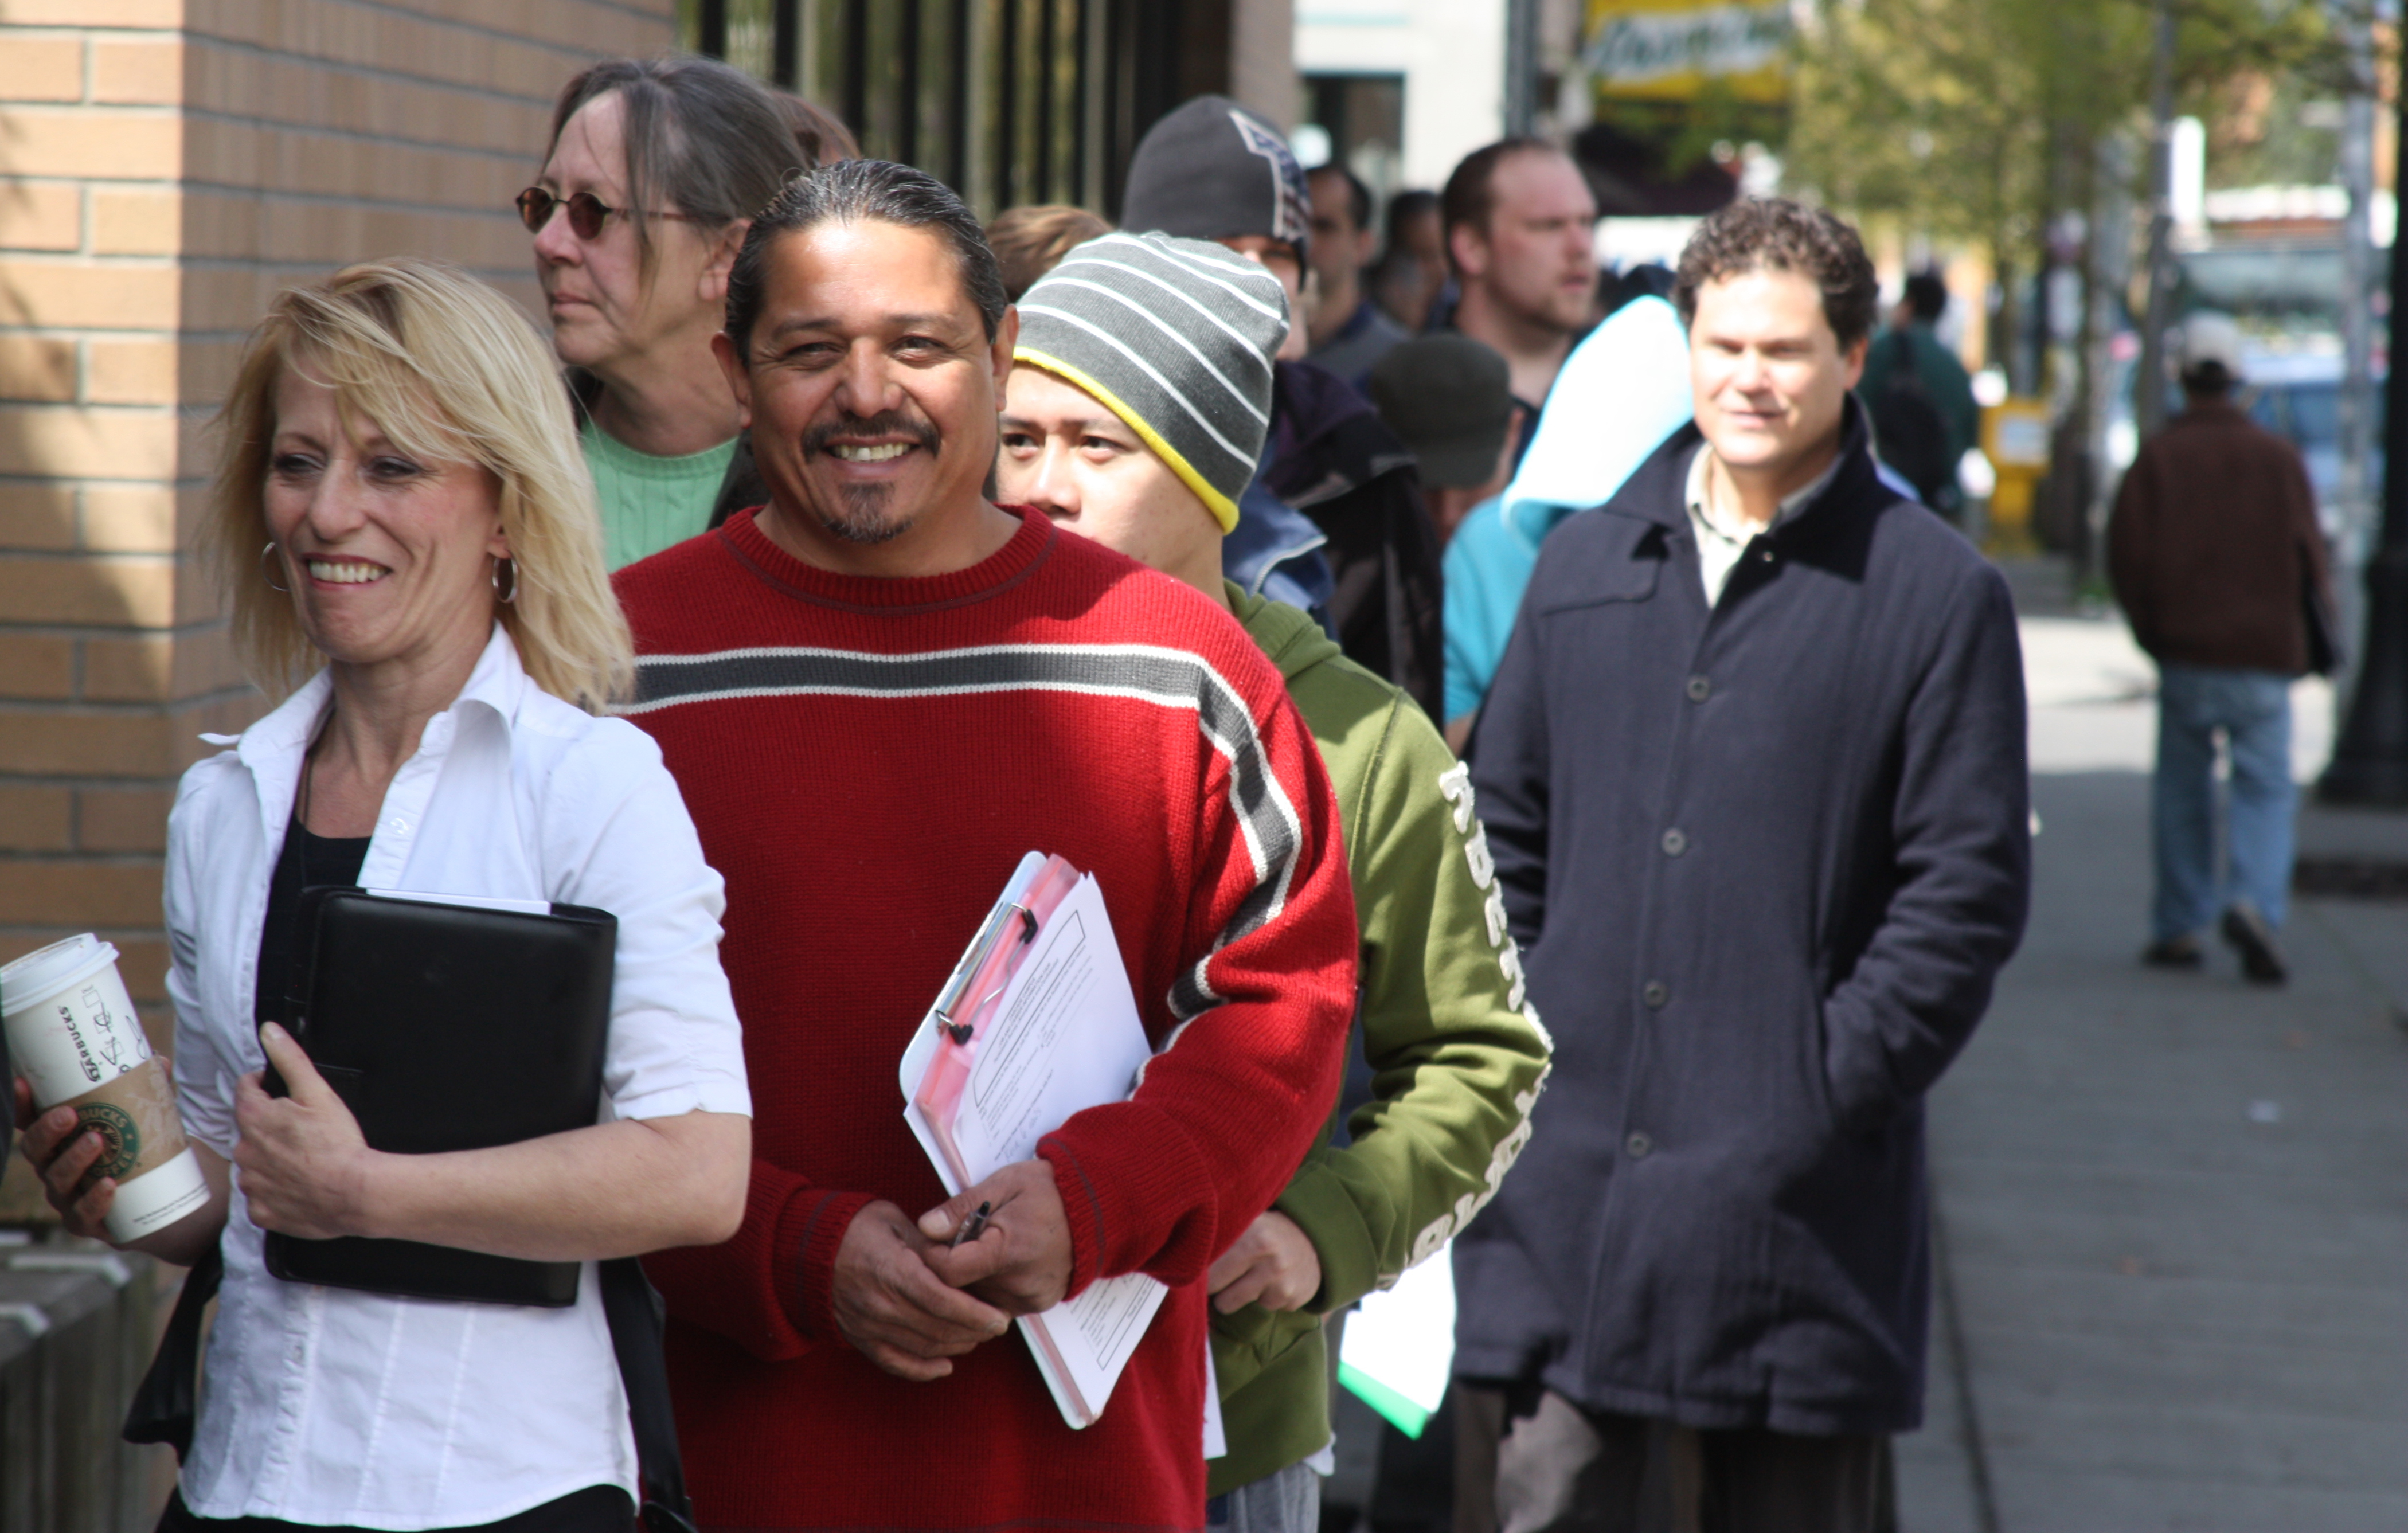 During the 2011 job fair, the line to get in wrapped around the block.